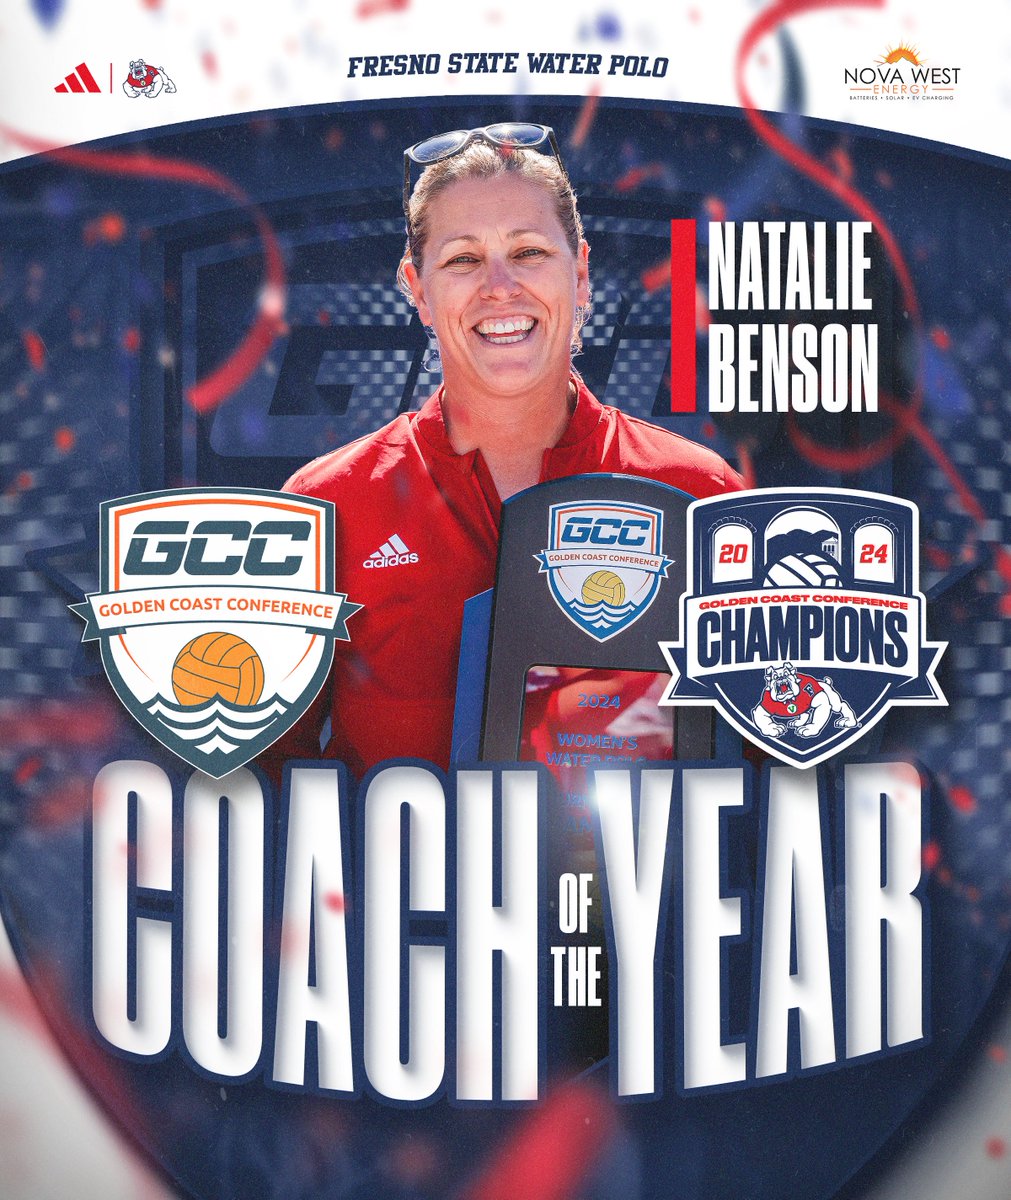 She's done it 𝘼𝙂𝘼𝙄𝙉‼️ Natalie Benson earns the @GCCWP Coach of the Year honor for the fourth year in a row🏆🐐